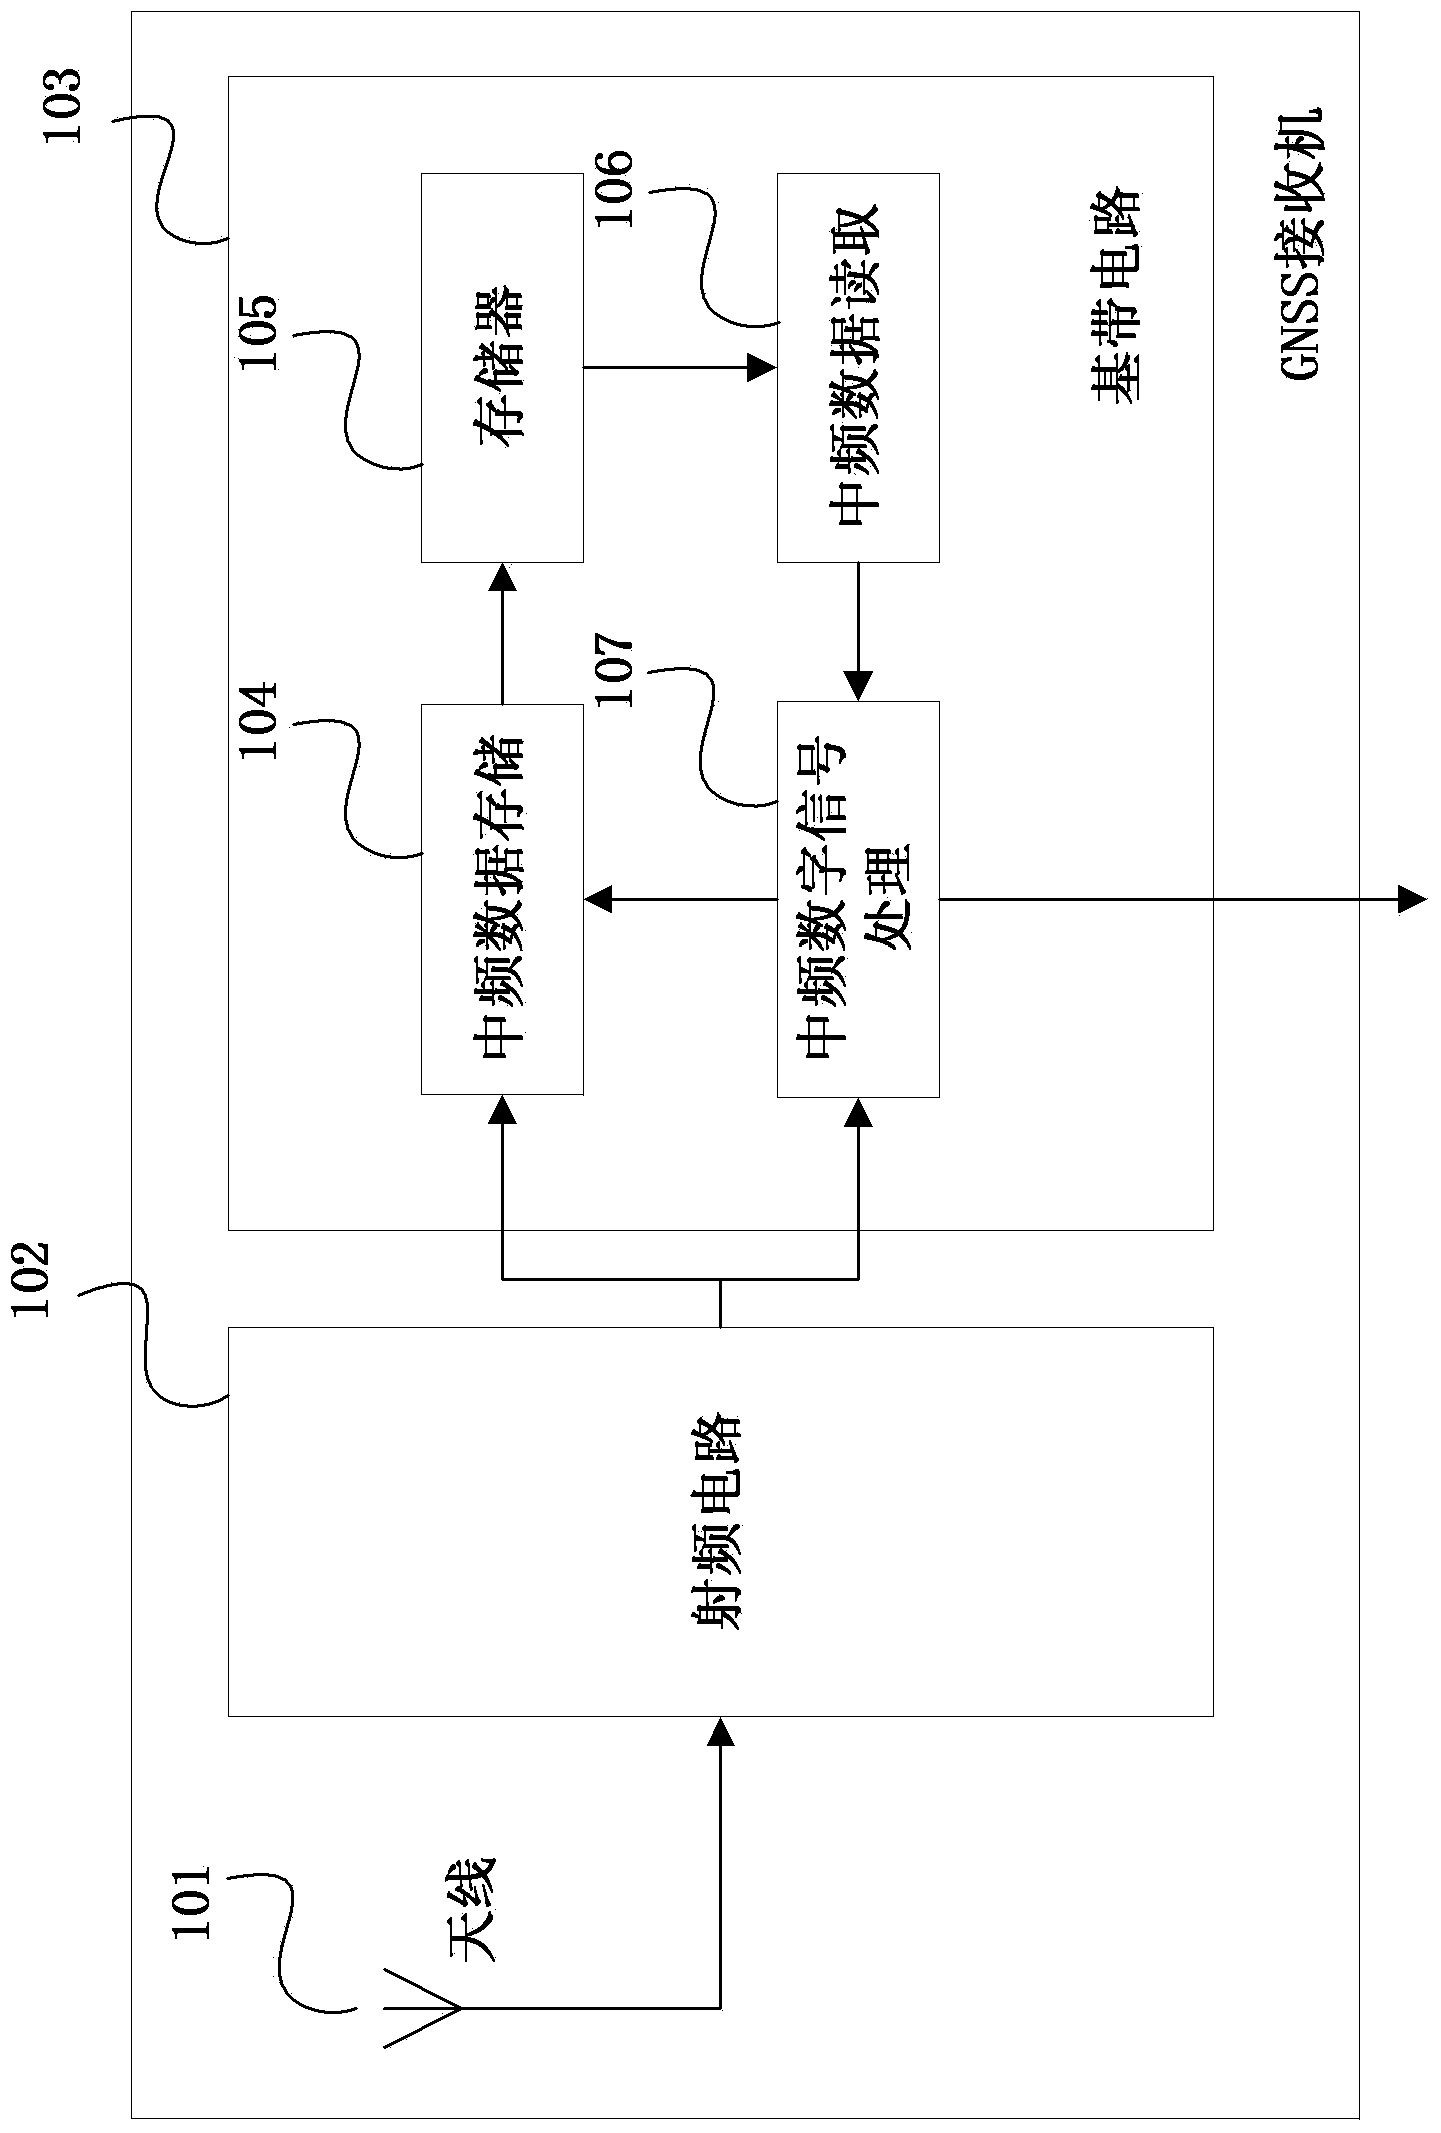 GNSS (global navigation satellite system) receiver and intermediate frequency data processing method thereof